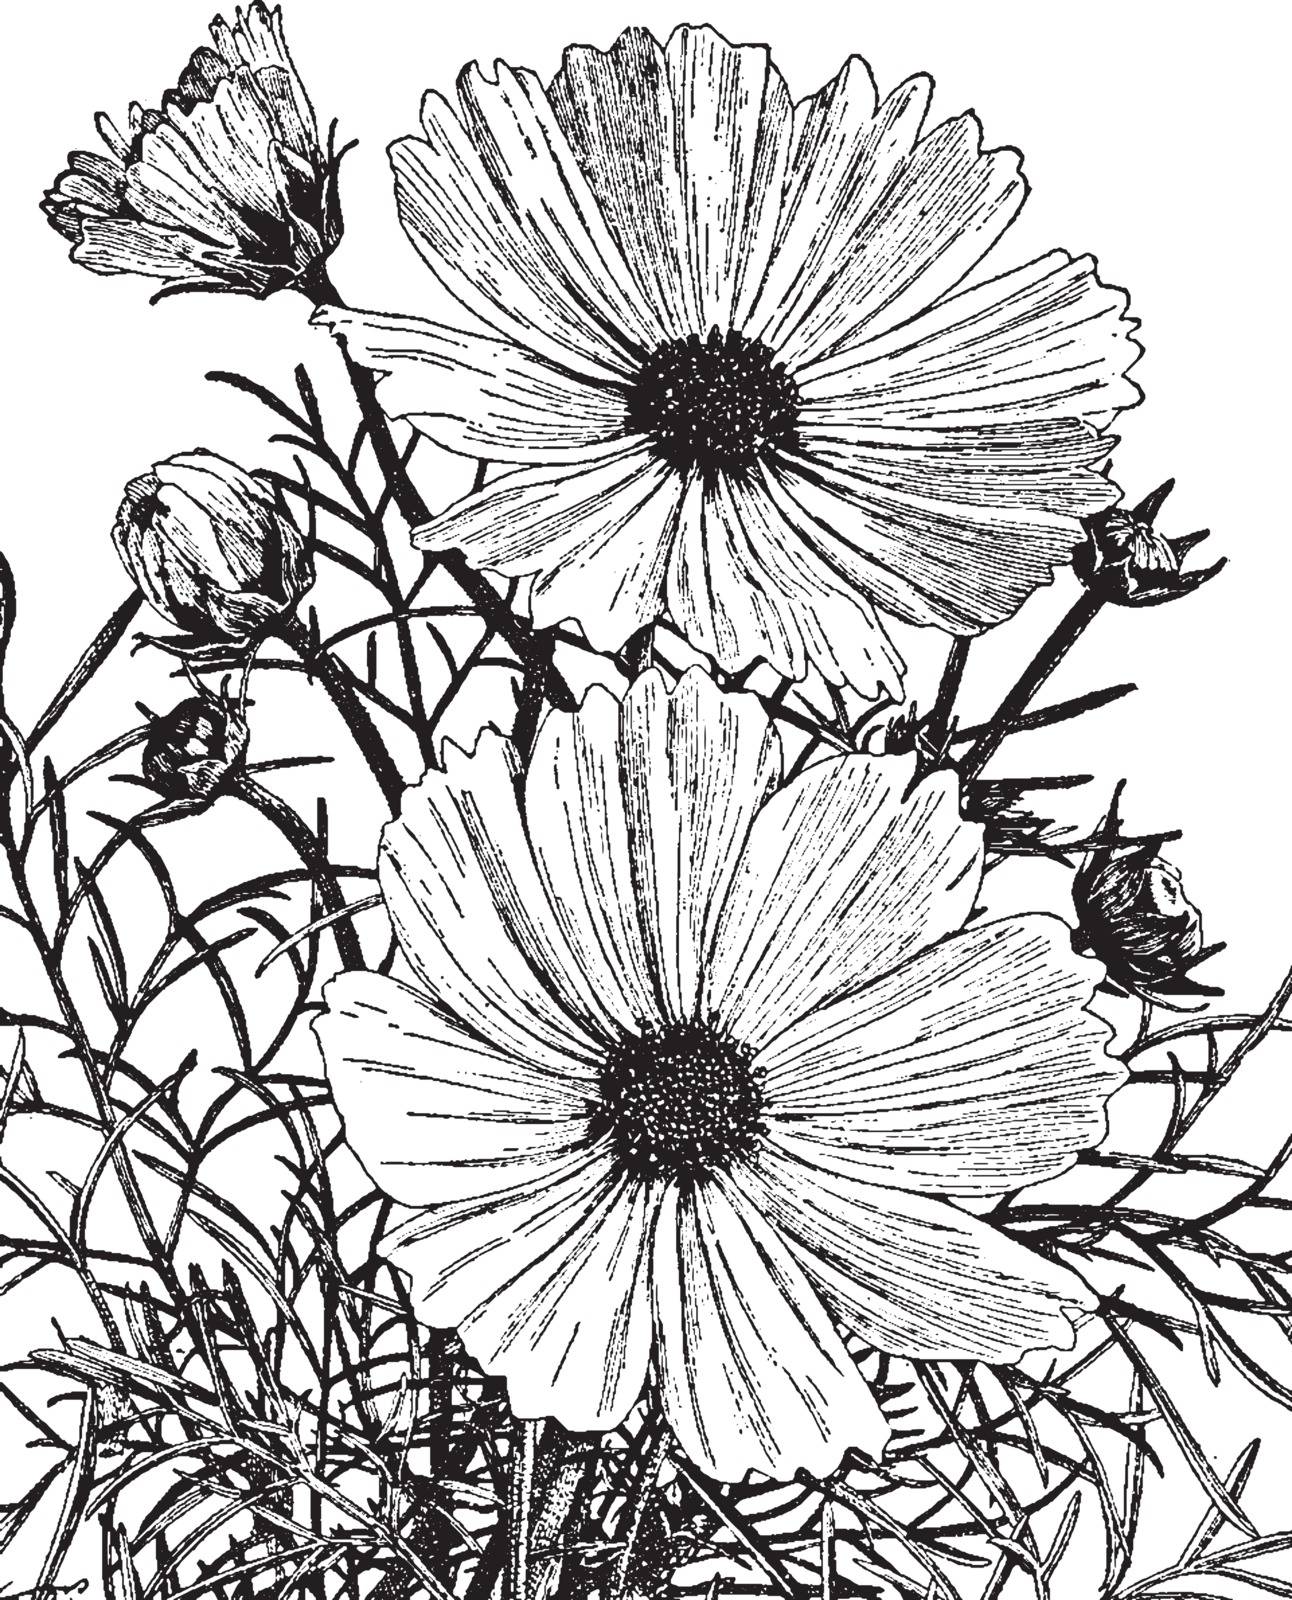 Cosmos Bipinnatus is an annual flower, the height of the plant is 2-4 feet; the flowers are white, pink and purple; its leaves are subtly cut into segments closely, vintage line drawing or engraving illustration.